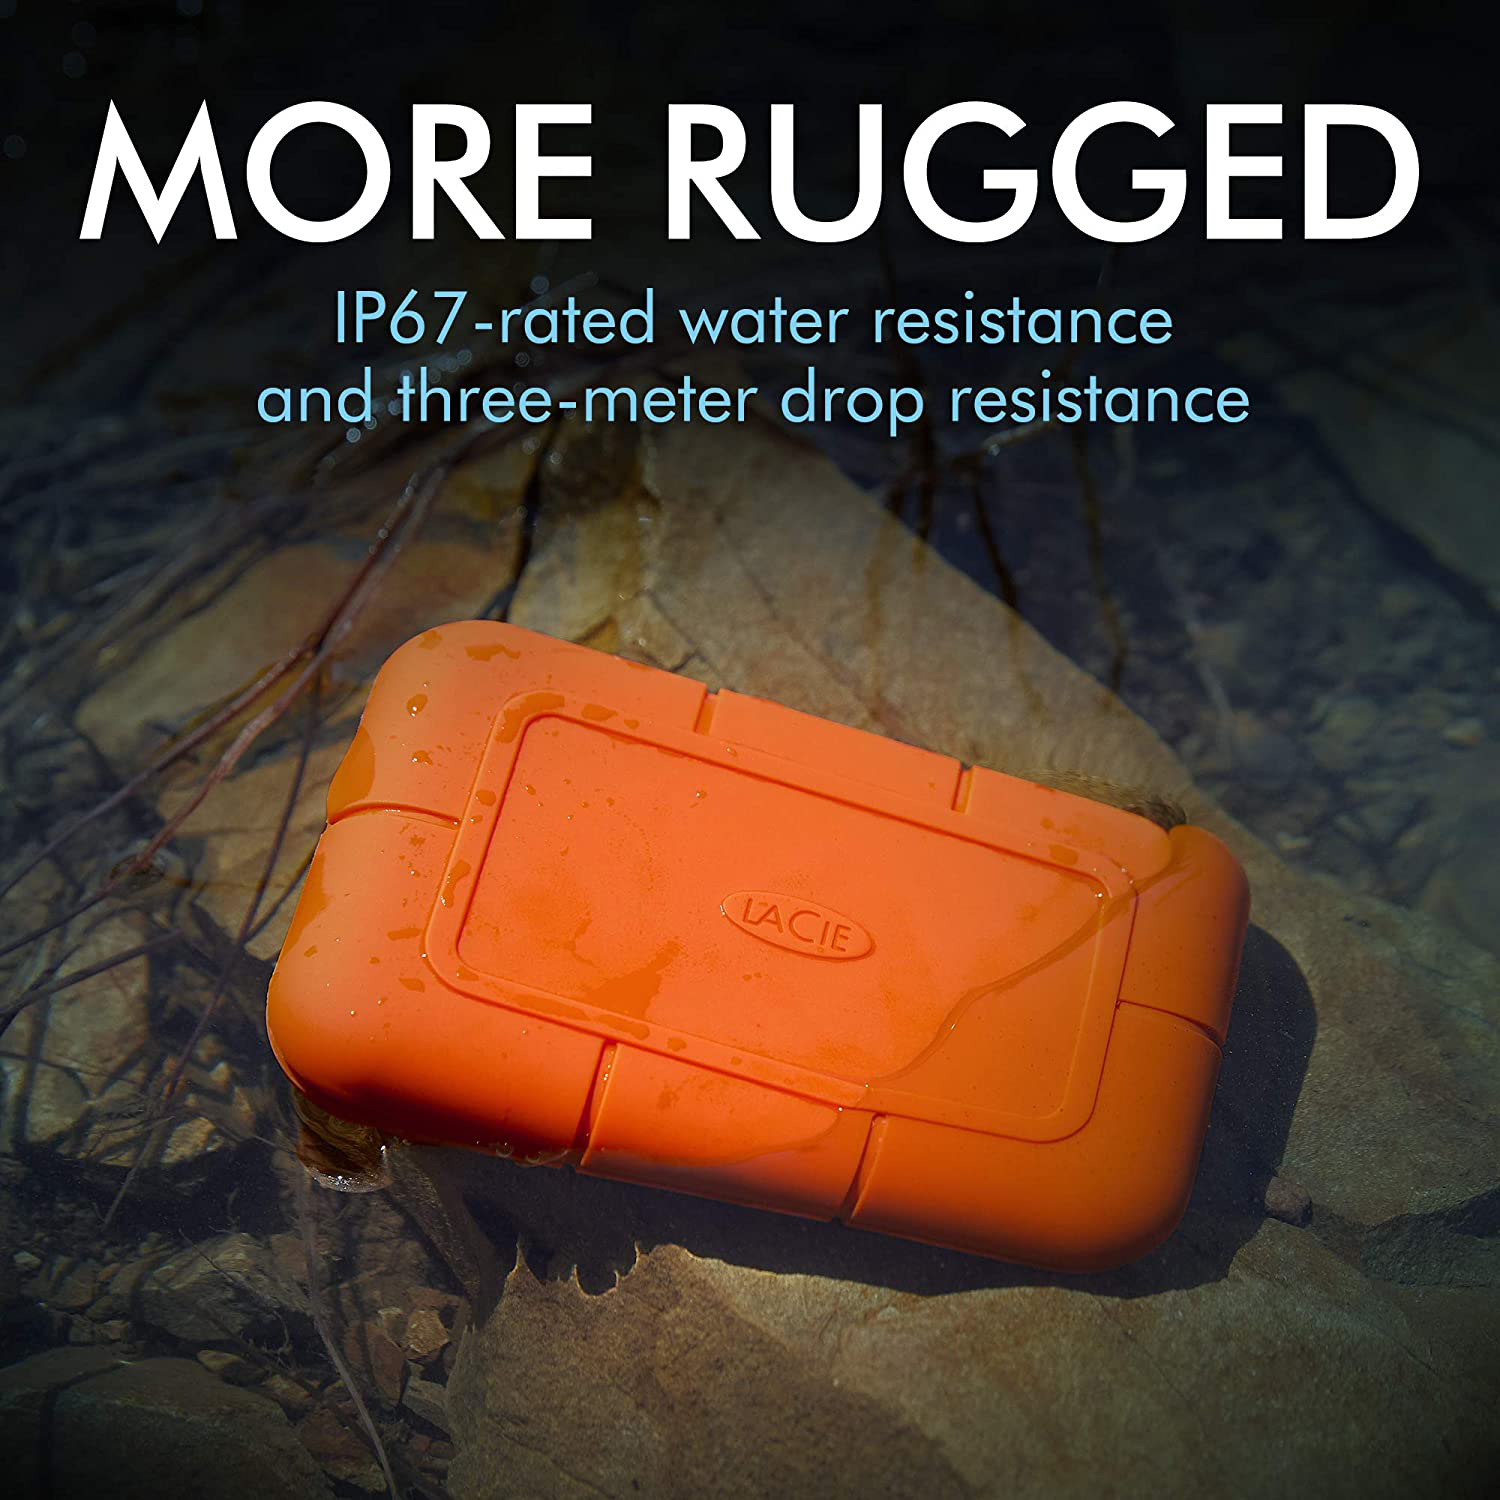 Lacie Rugged SSD 500GB Solid State Drive — USB-C USB 3.2 Nvme Speeds up to 1050Mb/S, IP67 Water Resistant, 3M Drop Resistant, Encryption, 5-Year Warranty with Data Recovery, 1 Mo Adobe CC (STHR500800)